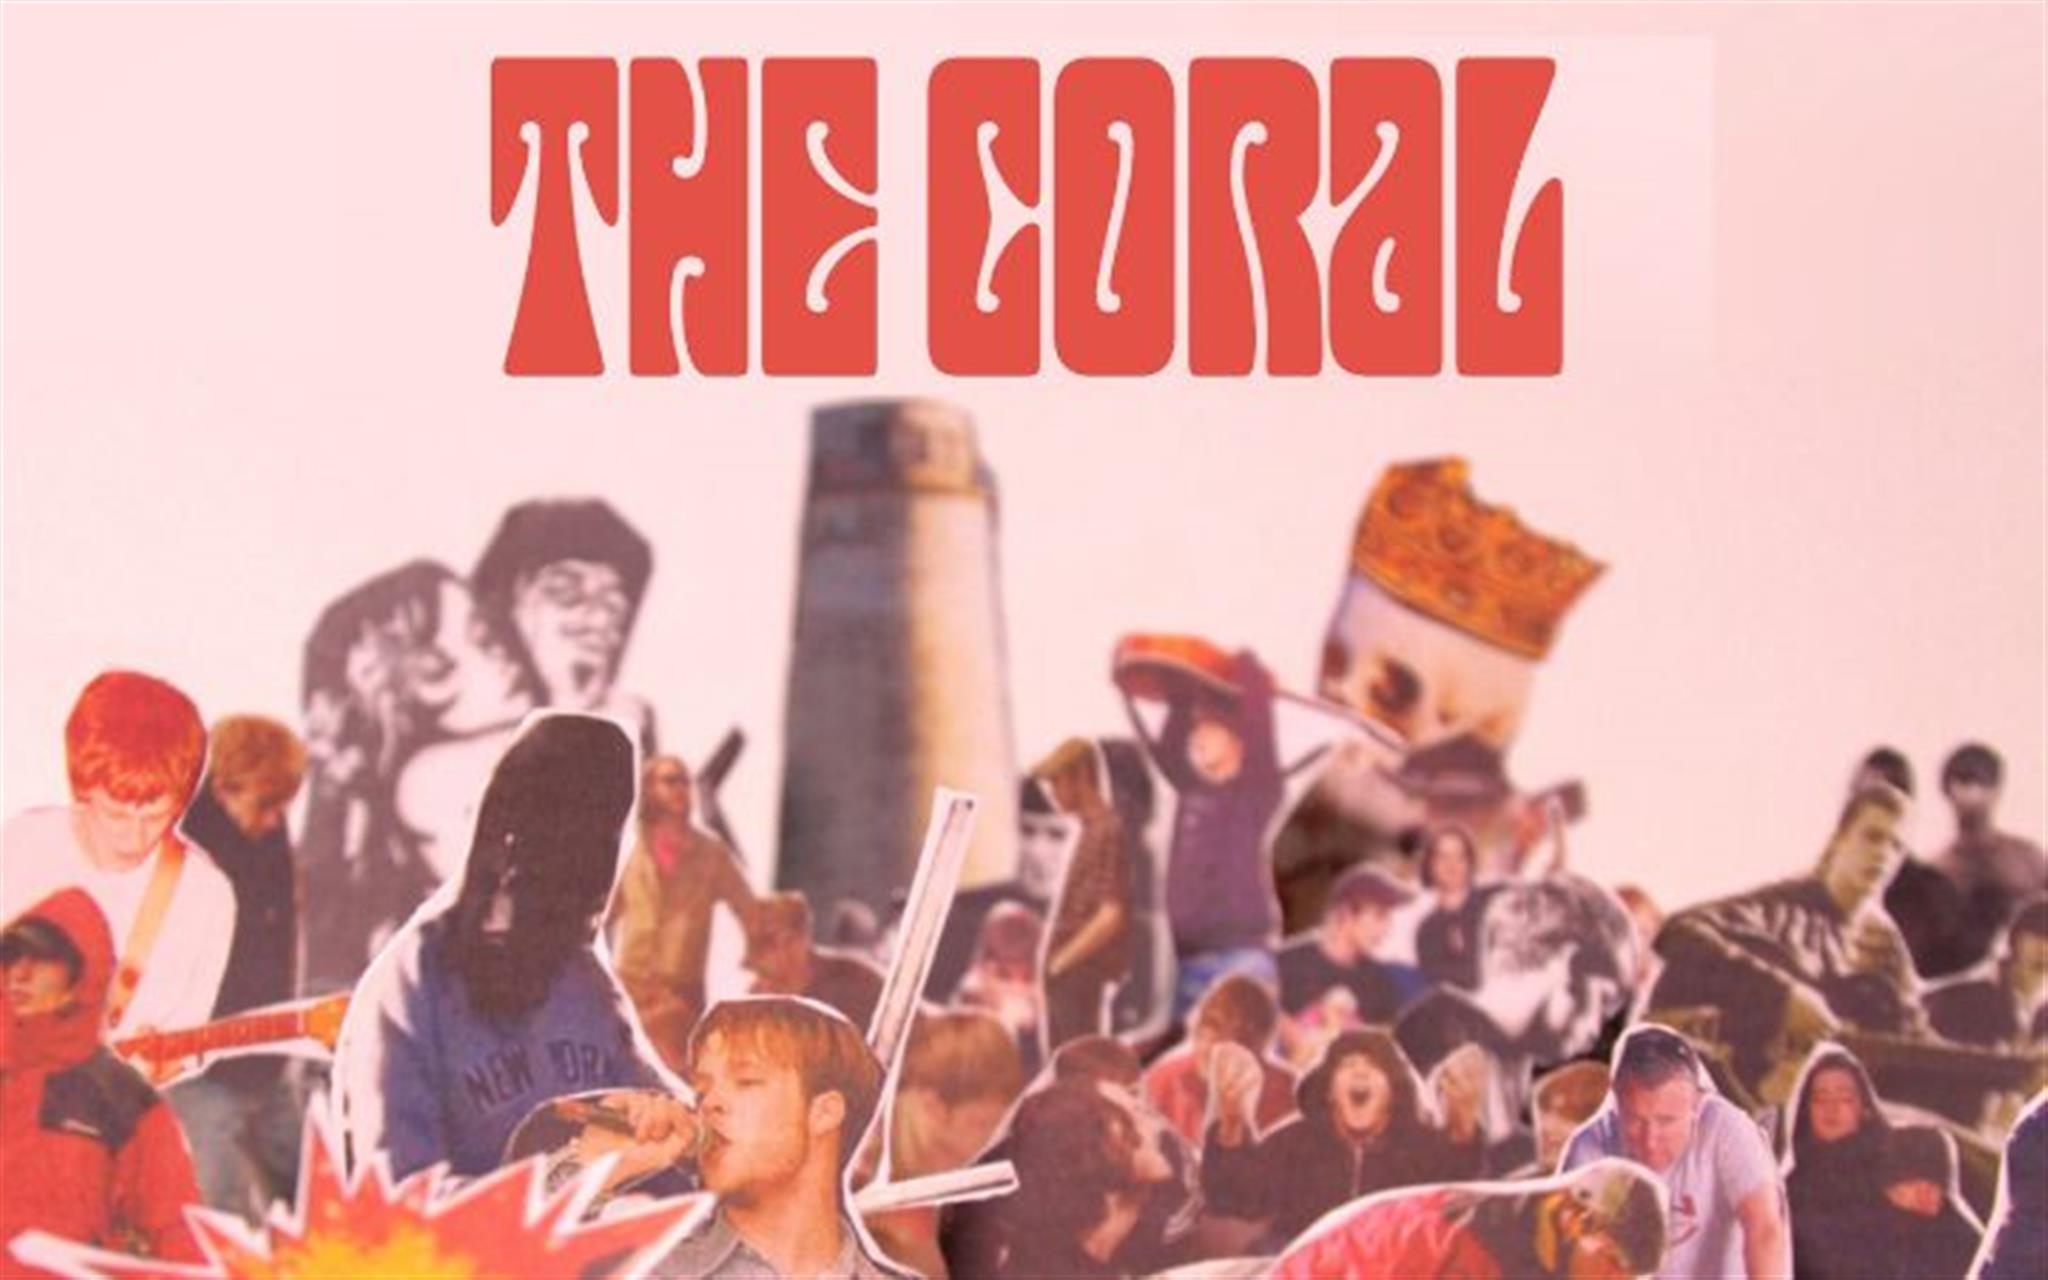 The Coral image